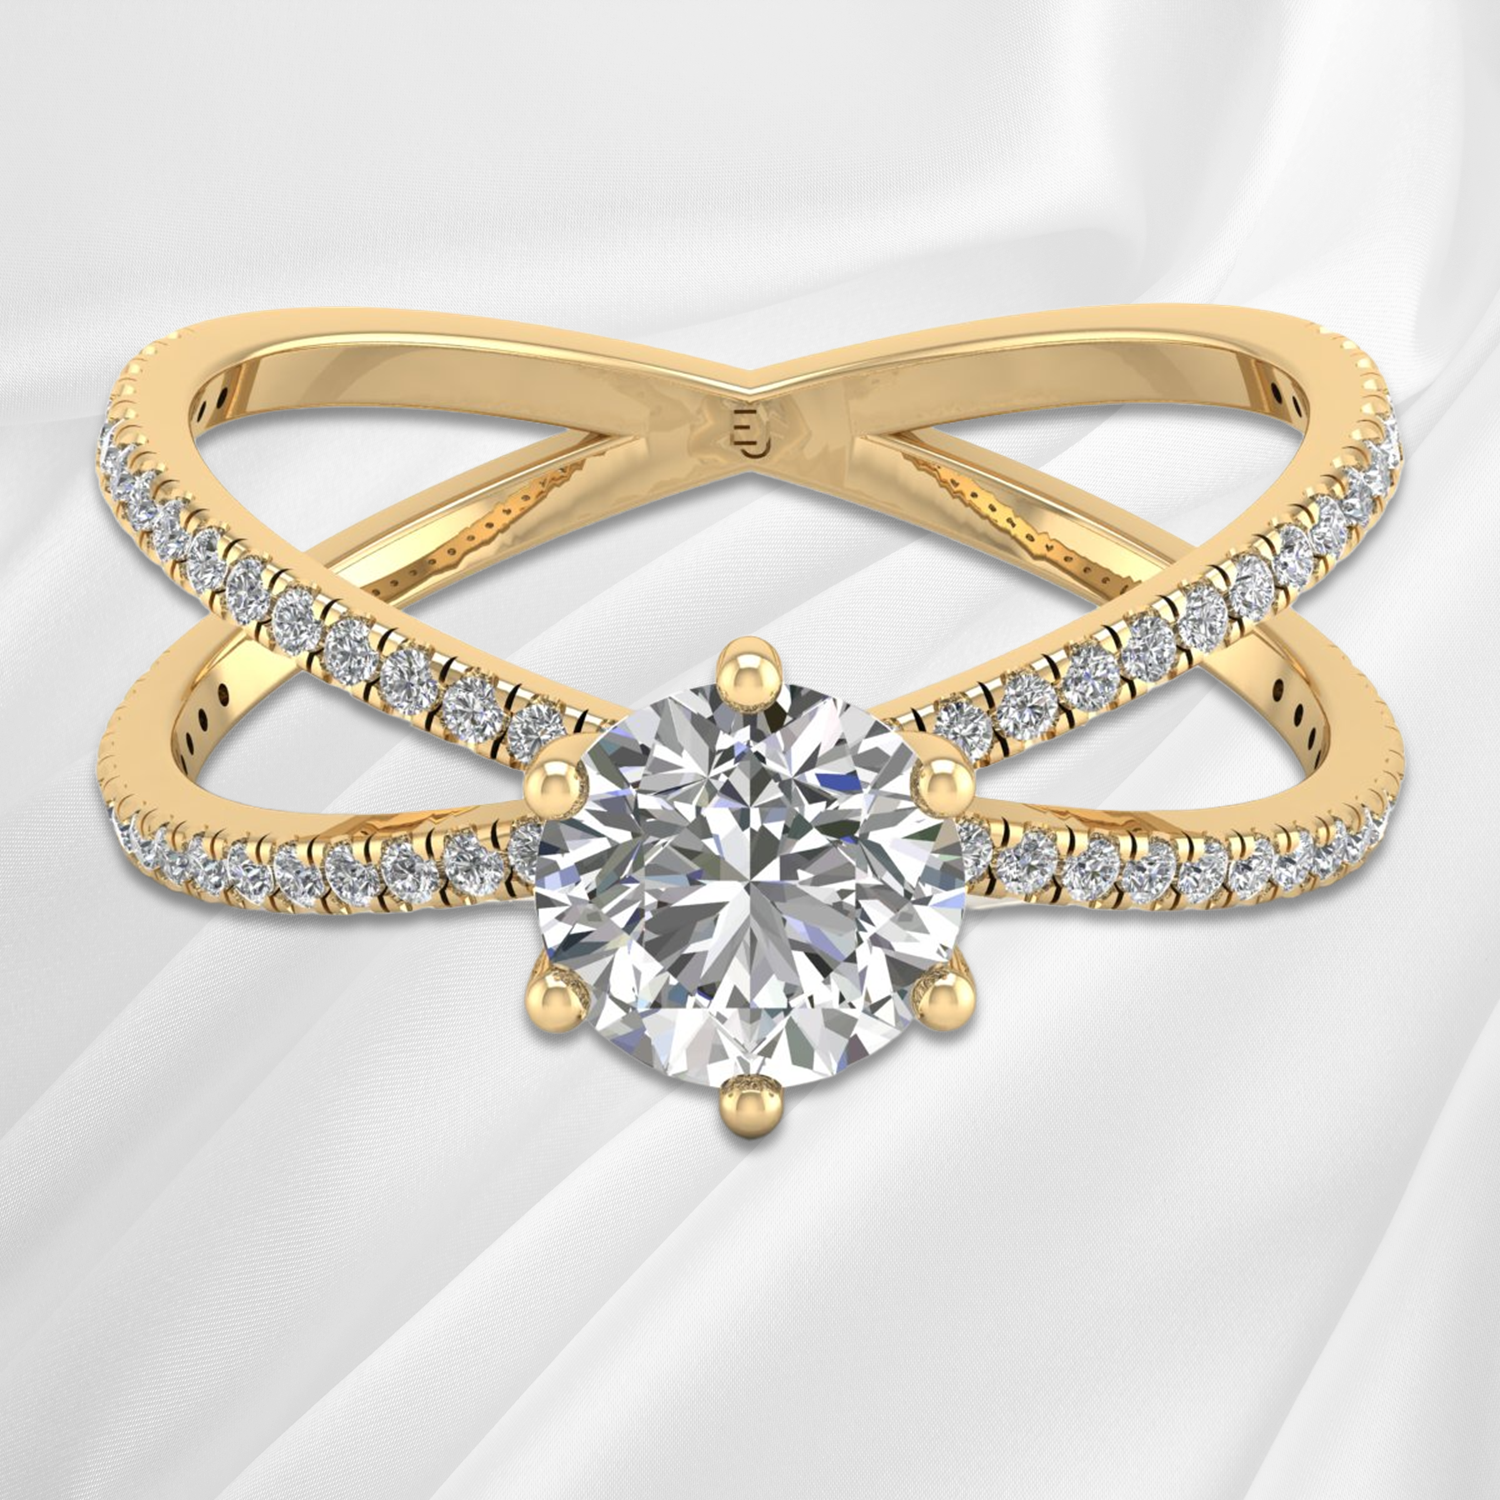 14k Yellow Gold G.I.A. Certified .73 carat Round Brilliant Cut Diamond  Solitaire Ring